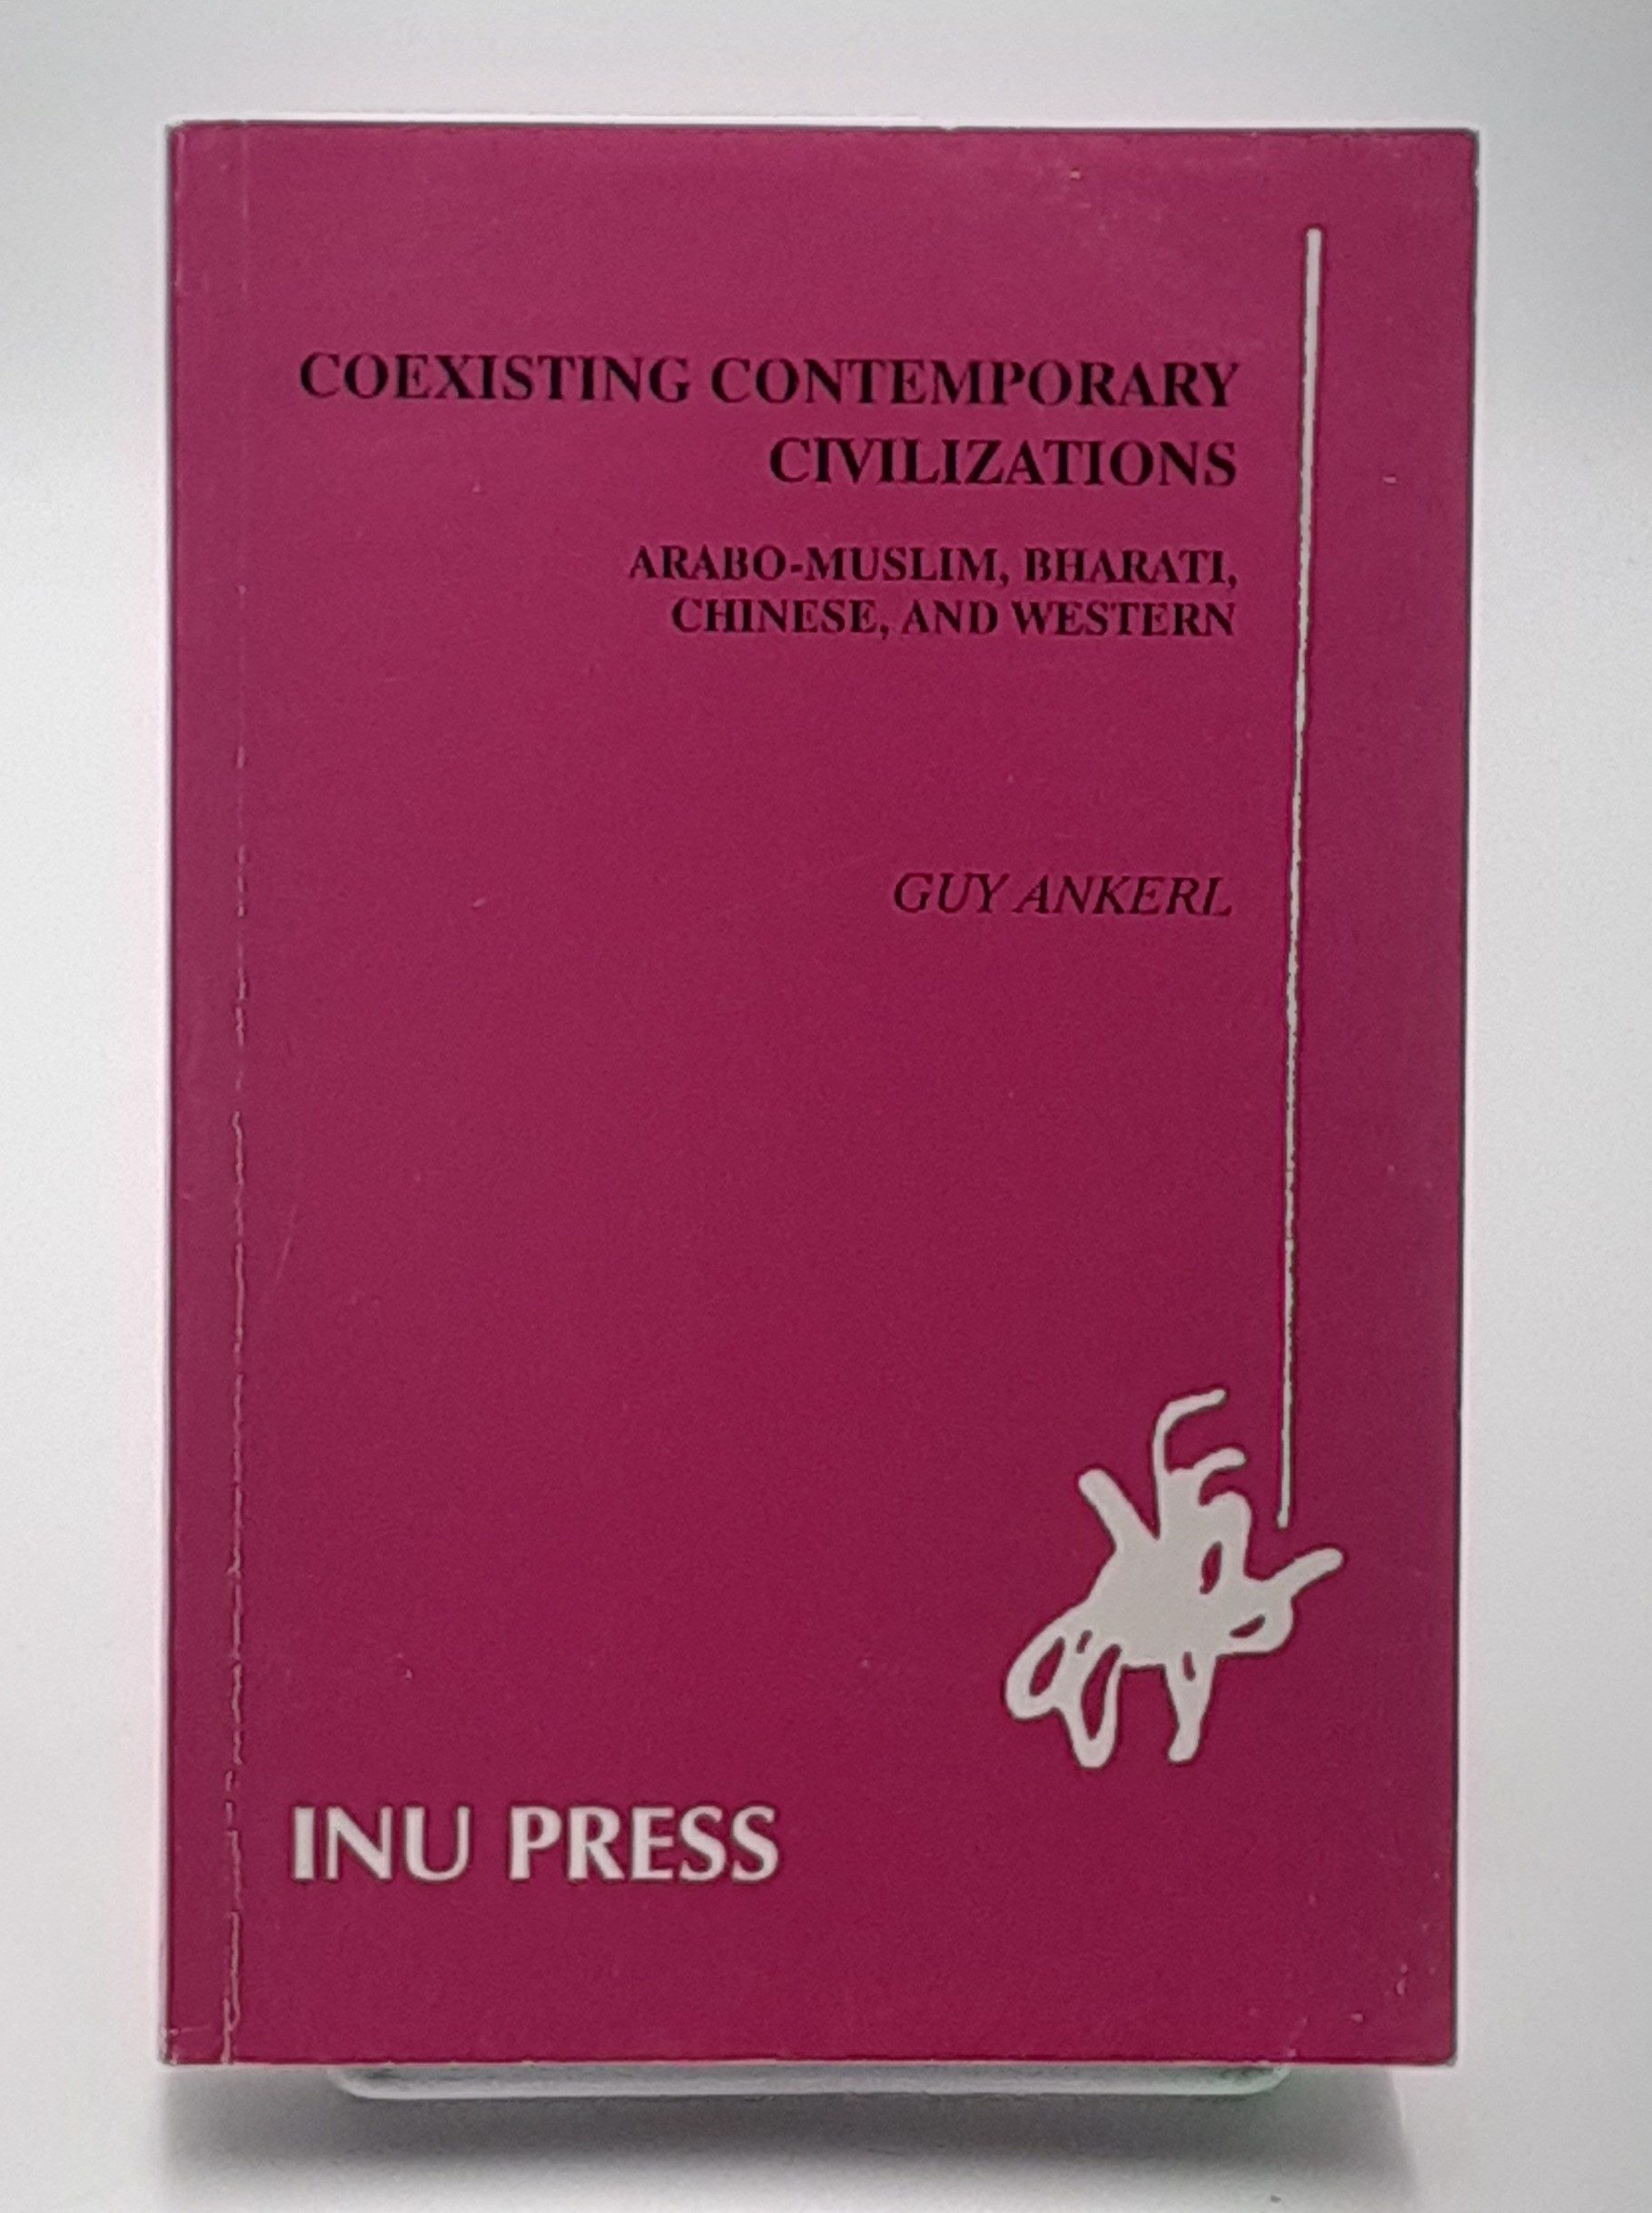 Coexisting Contemporary Civilizations; Arabo-Muslim, Bharati, Chinese, and Western (Book One), A Scientific Essay; Global Communication Without Universal Civilization. - Ankerl, Guy.